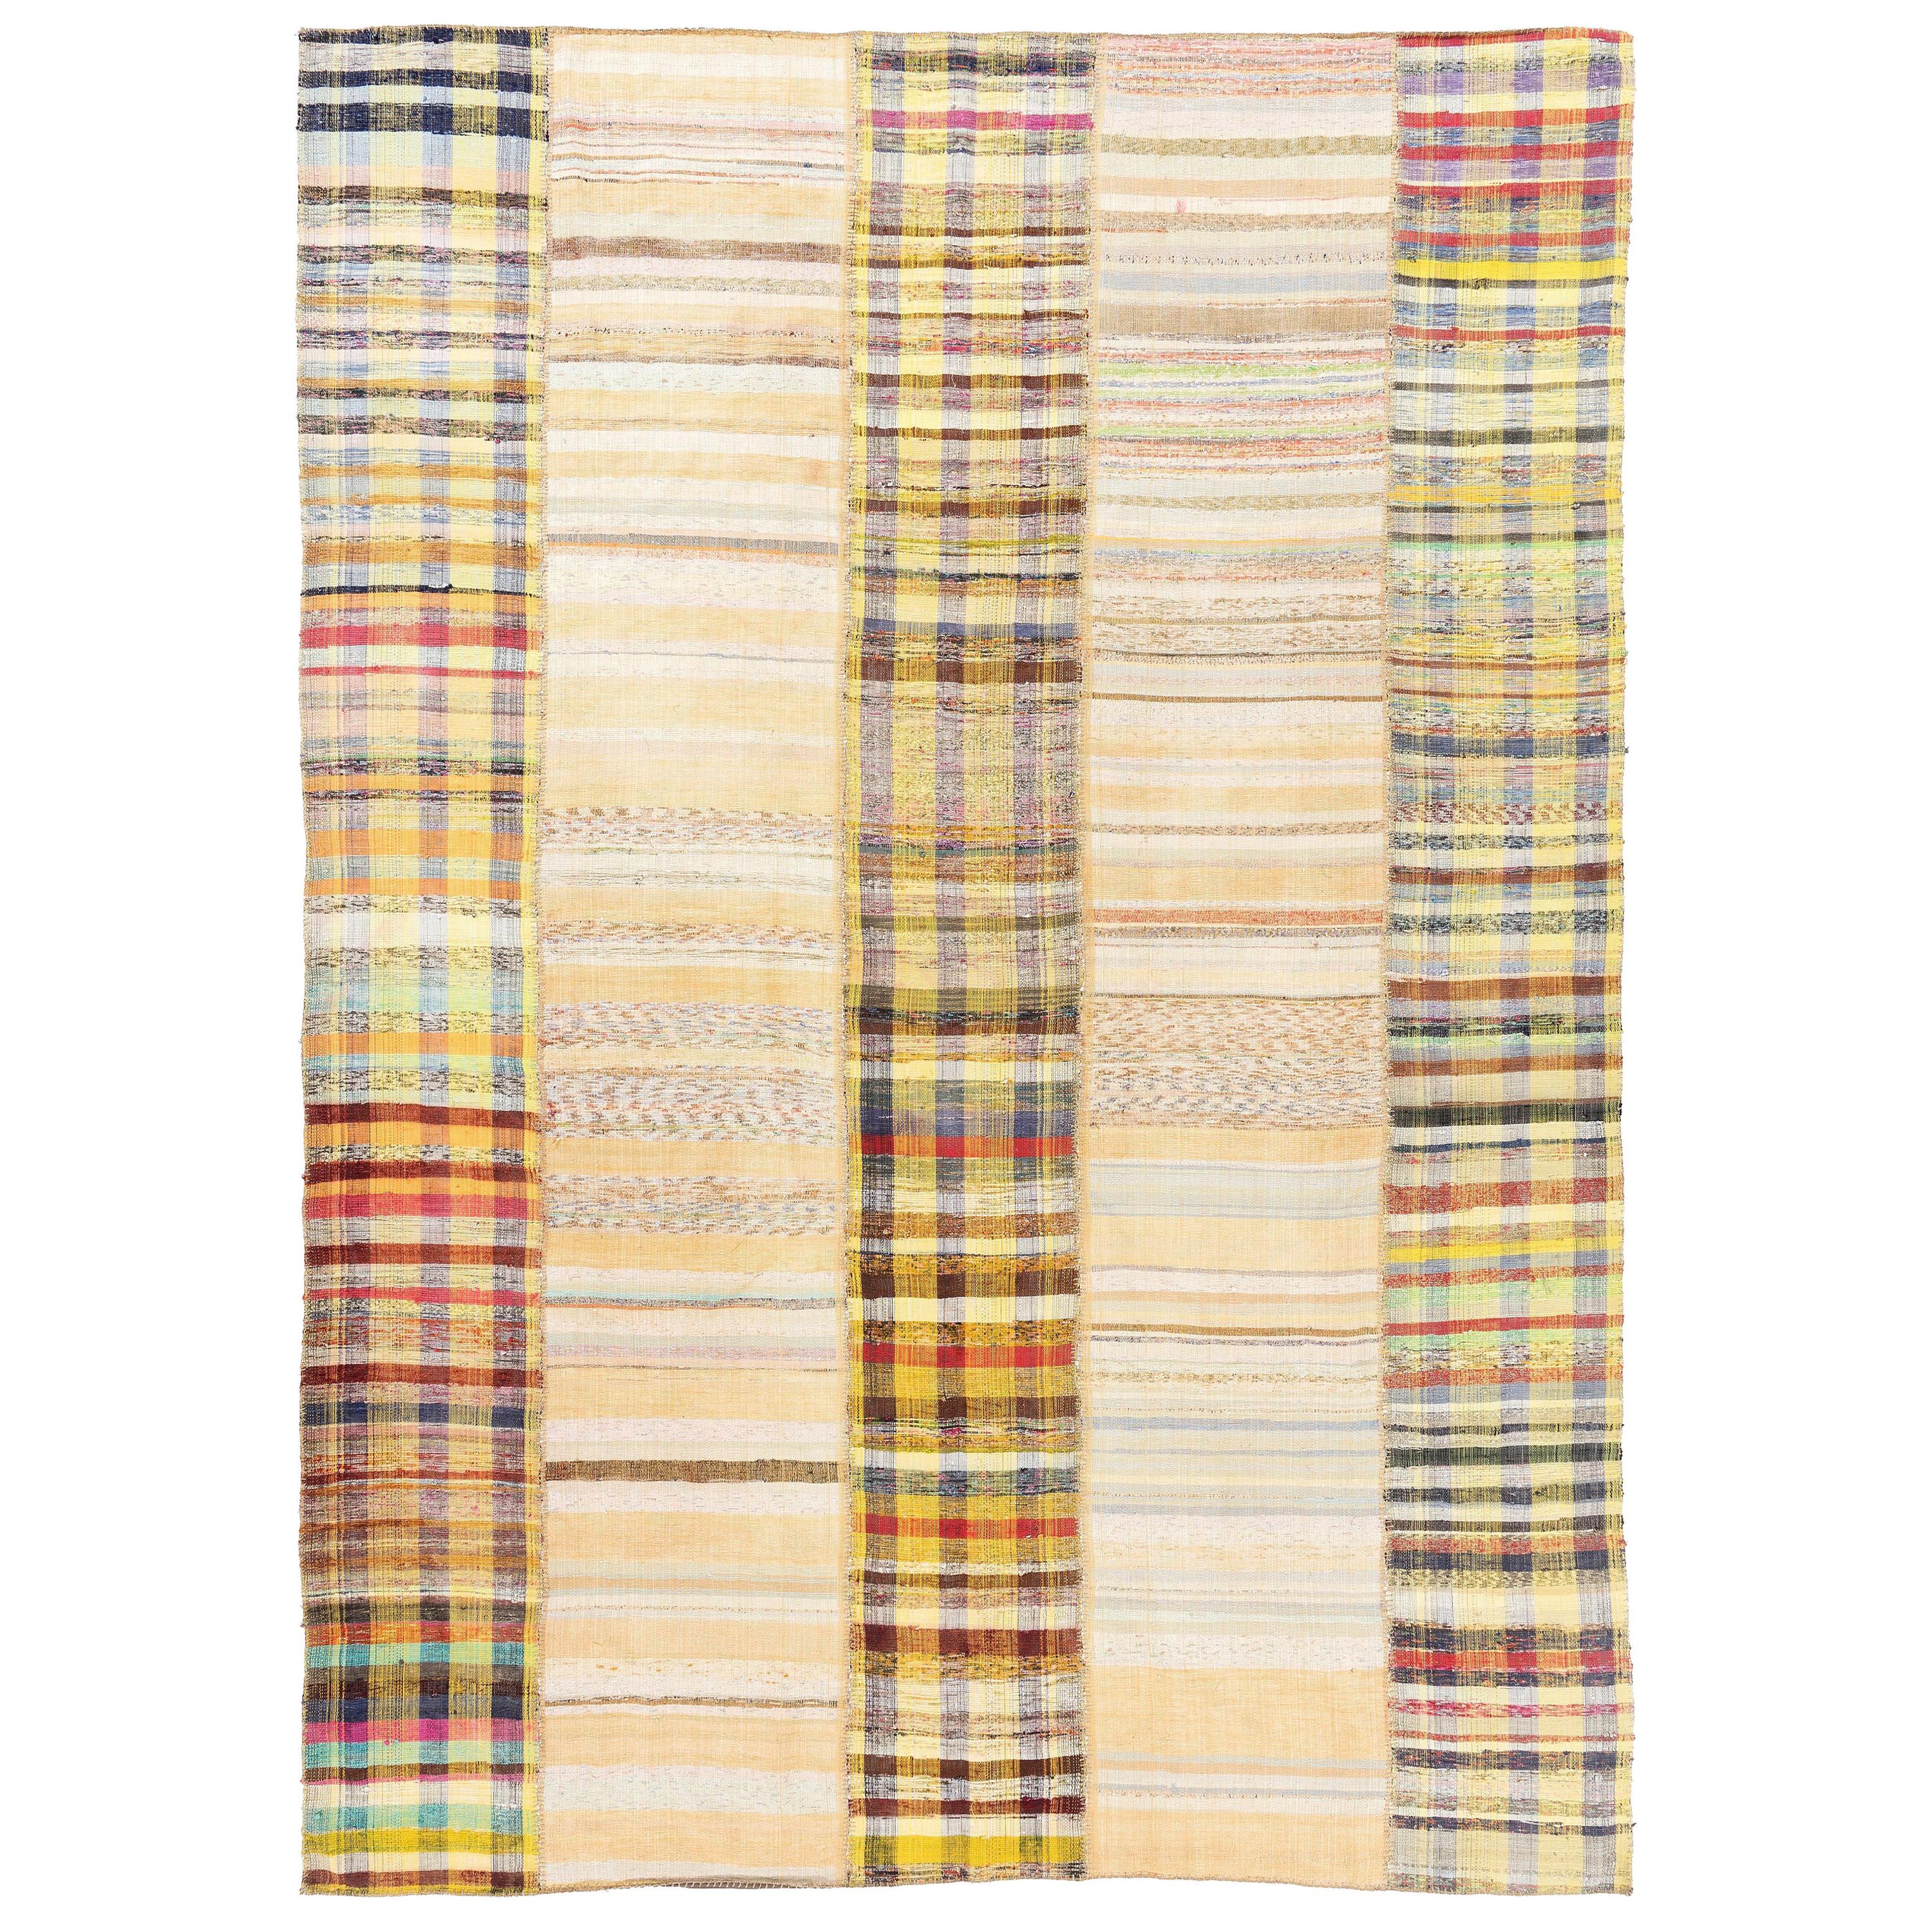 10x13.7 Ft Cotton Mid-Century Anatolian Kilim Hand-Woven Vintage Striped Rug For Sale